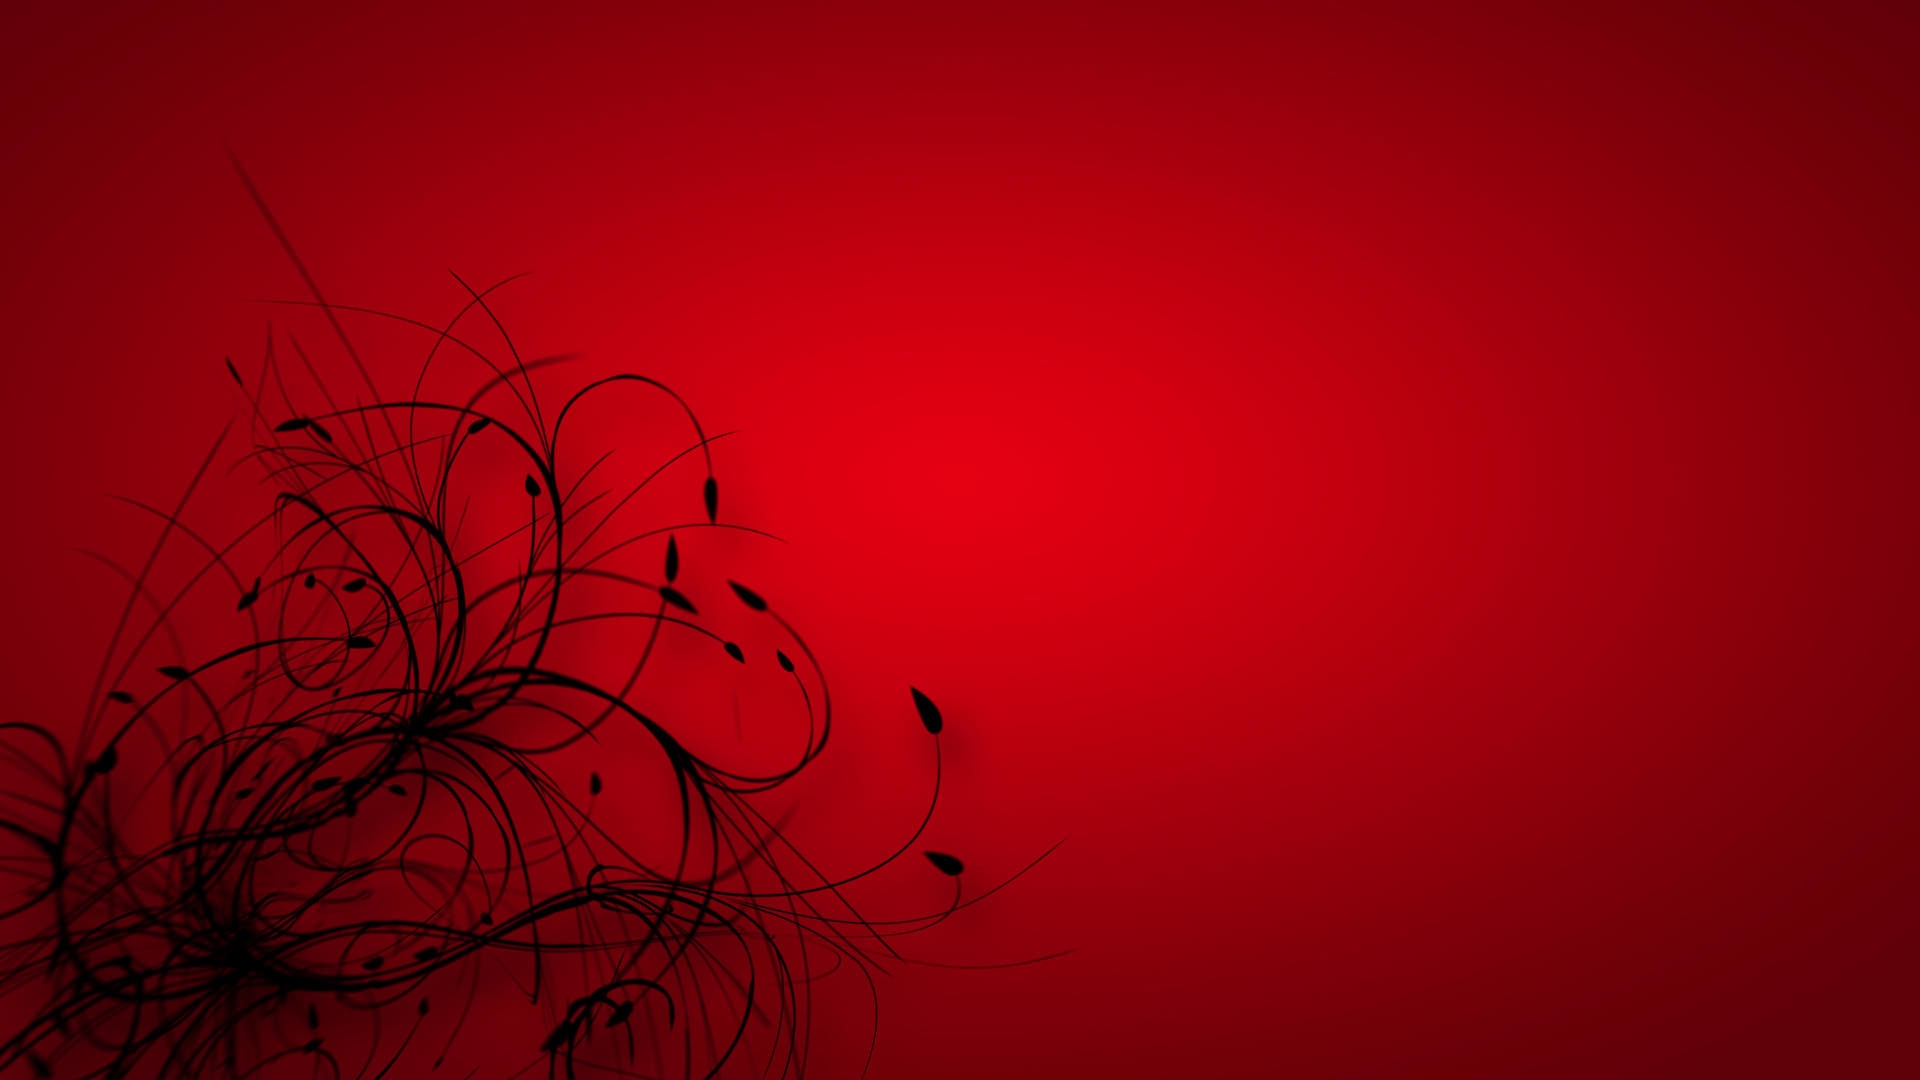 22 Red & Black Wallpapers, Backgrounds, Images FreeCreatives